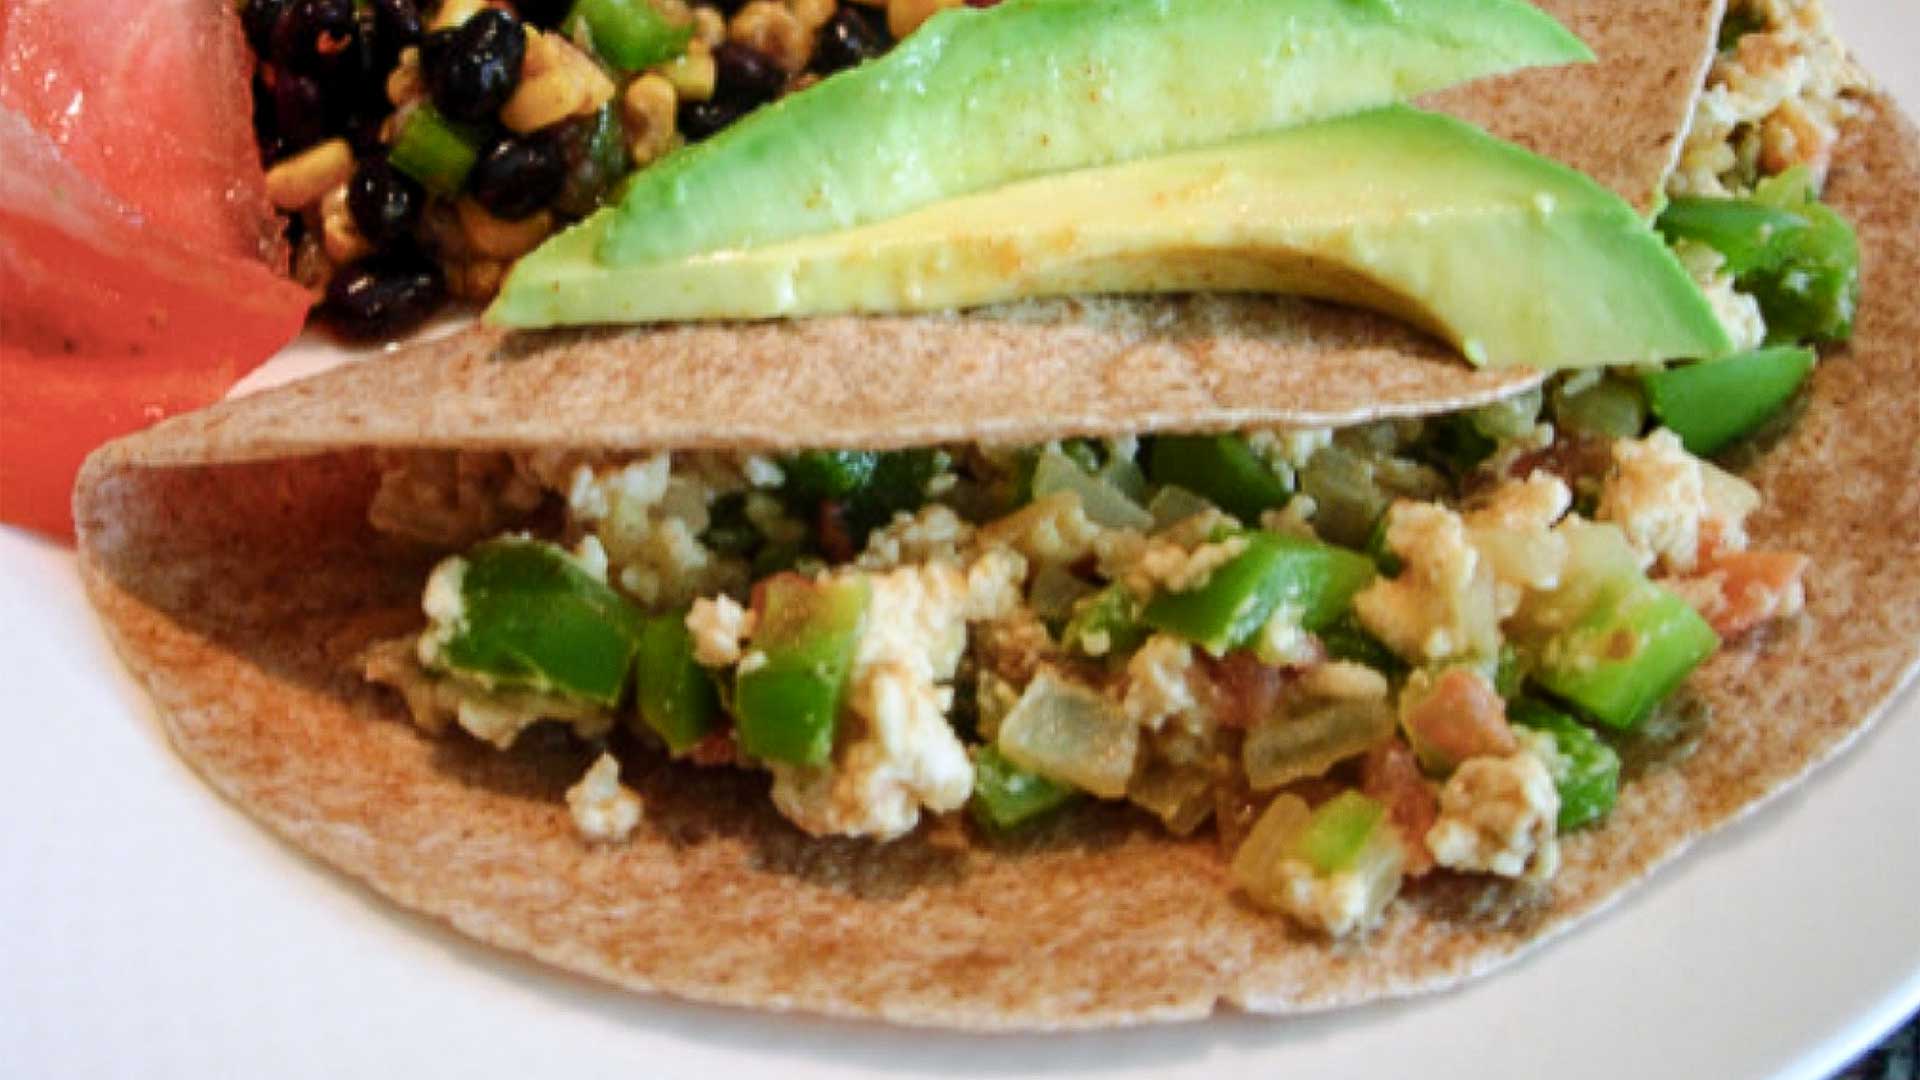 Egg salad in wheat tortilla with avocado on top